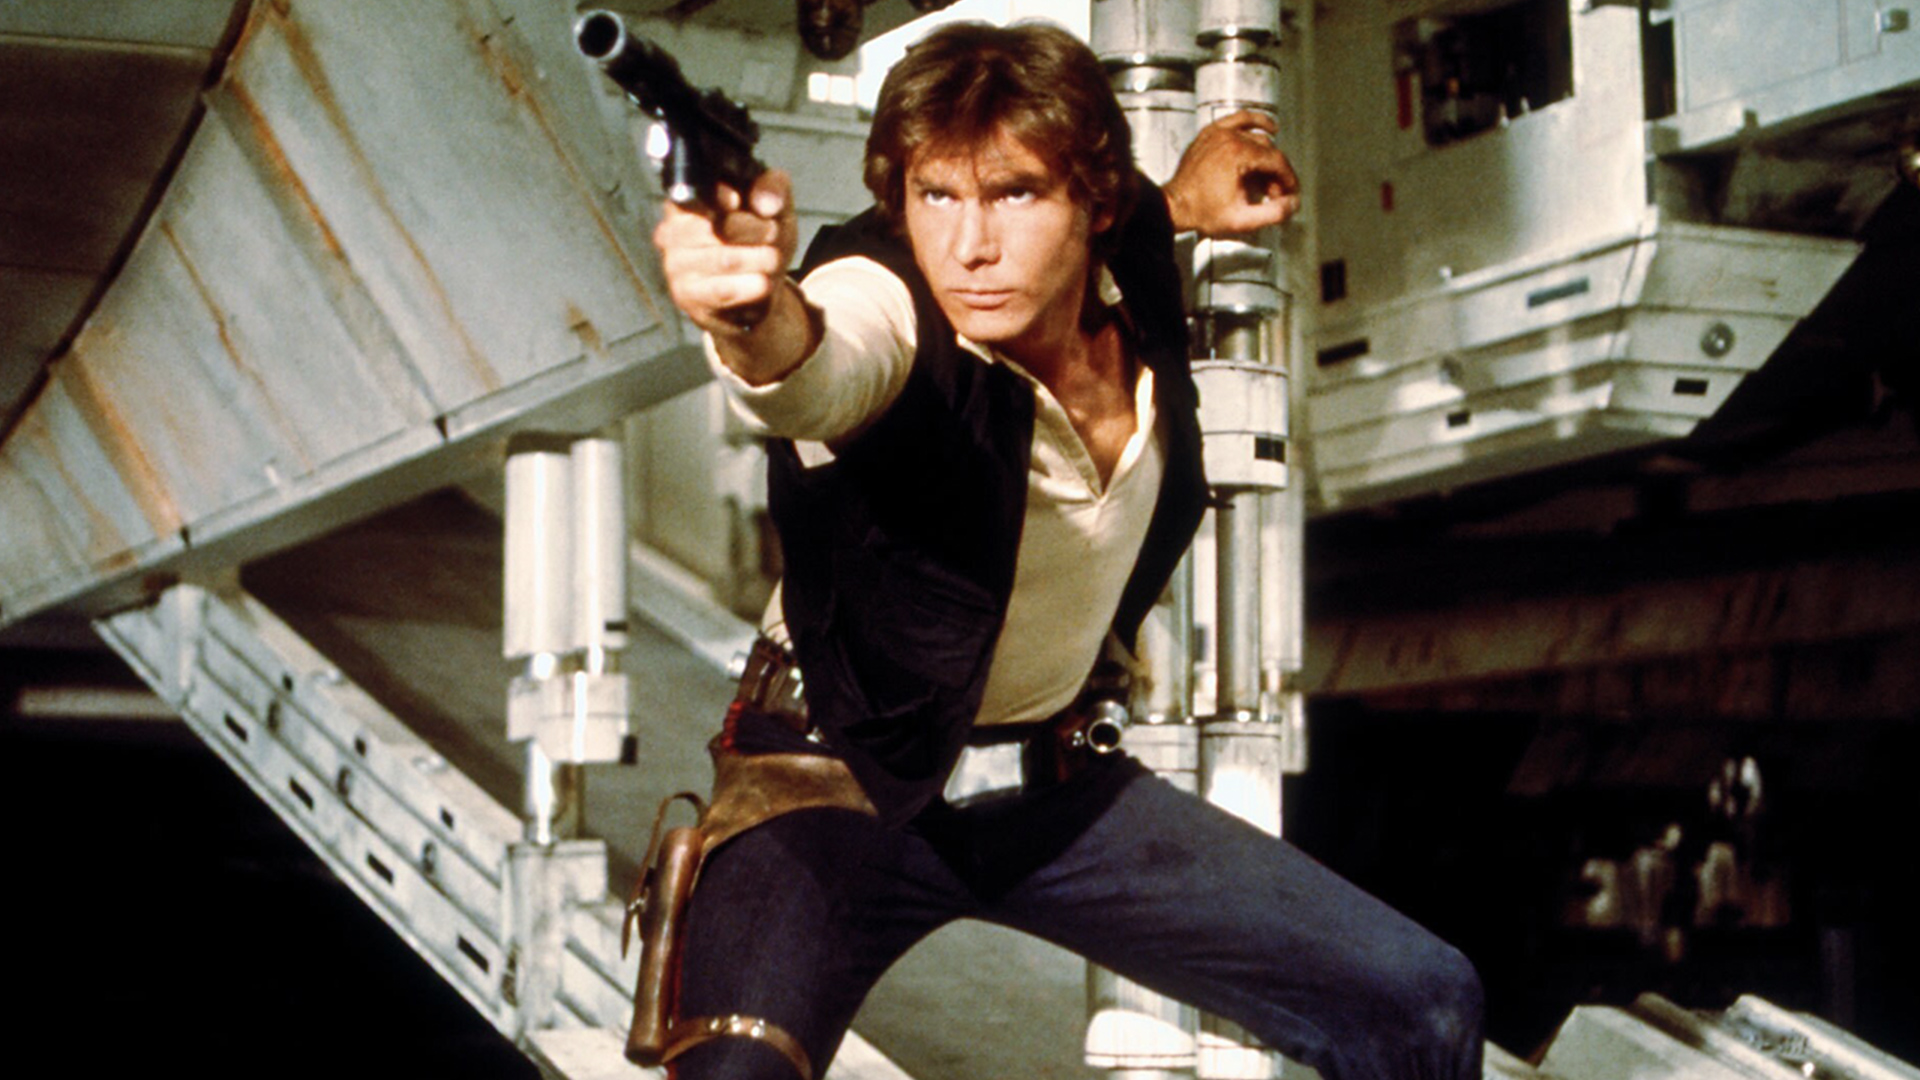 Han Solo from Star Wars holding a blaster